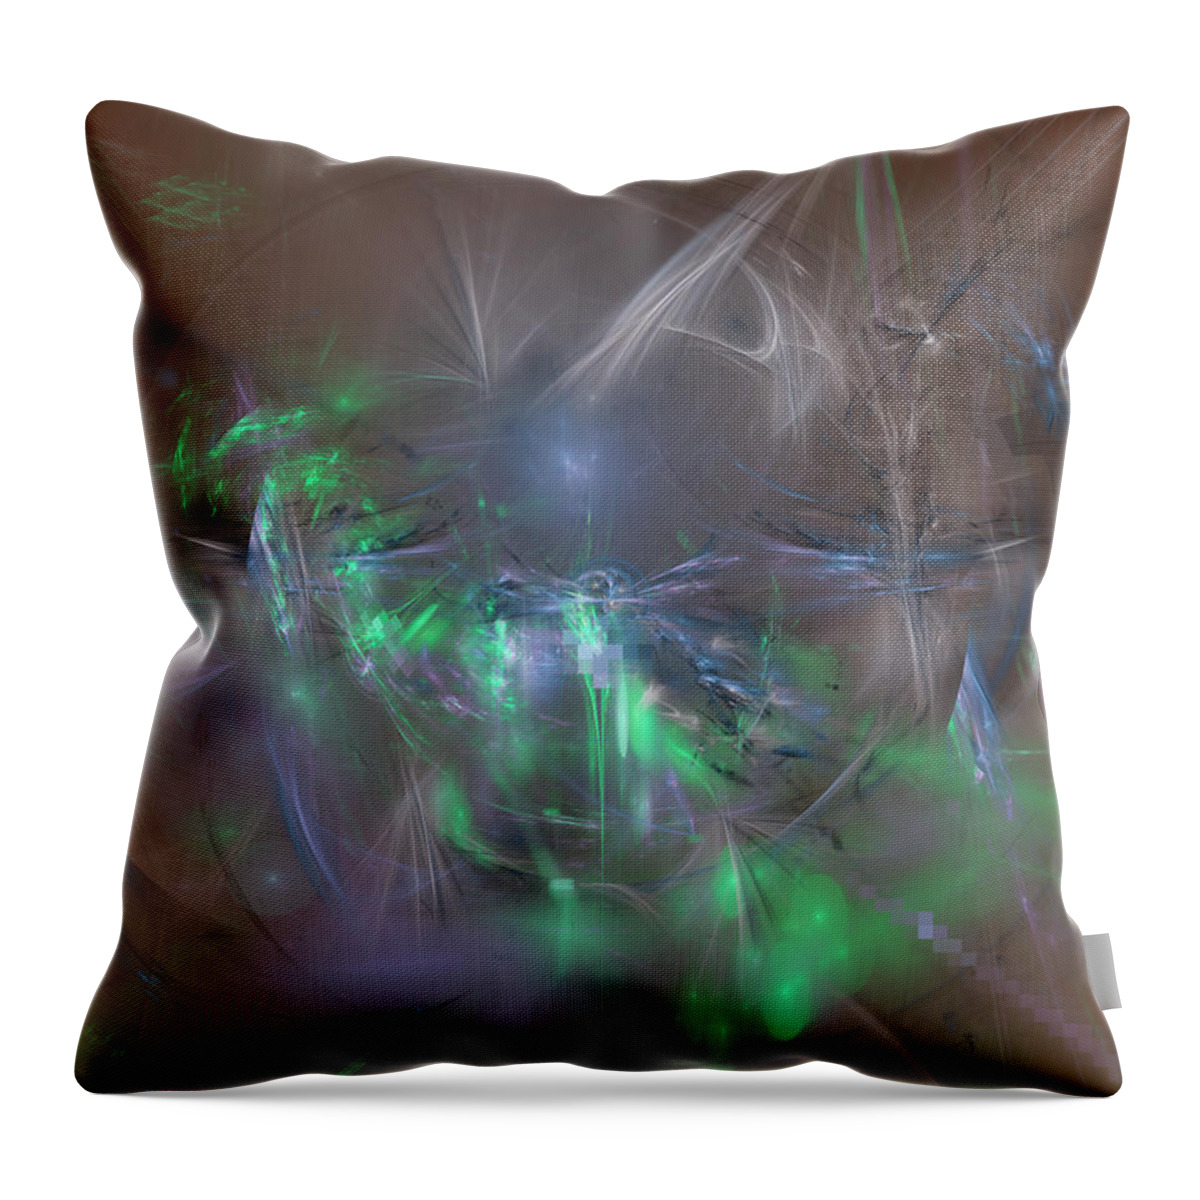 Art Throw Pillow featuring the digital art Onycha by Jeff Iverson